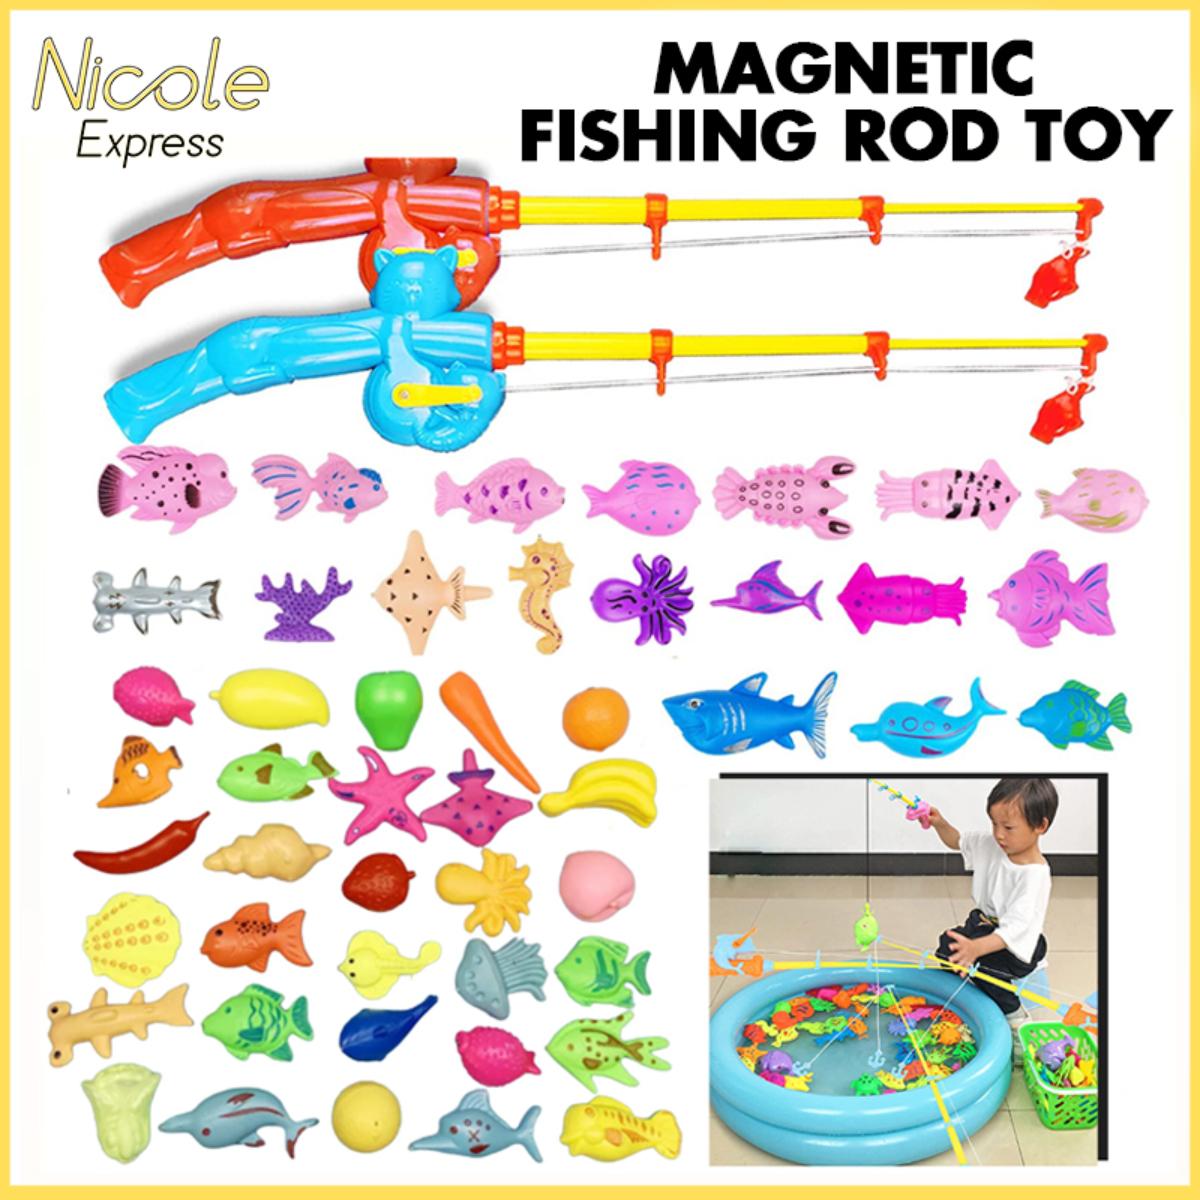 Magnetic Fishing Rod Toy for Kids Children's Unisex Water Playing